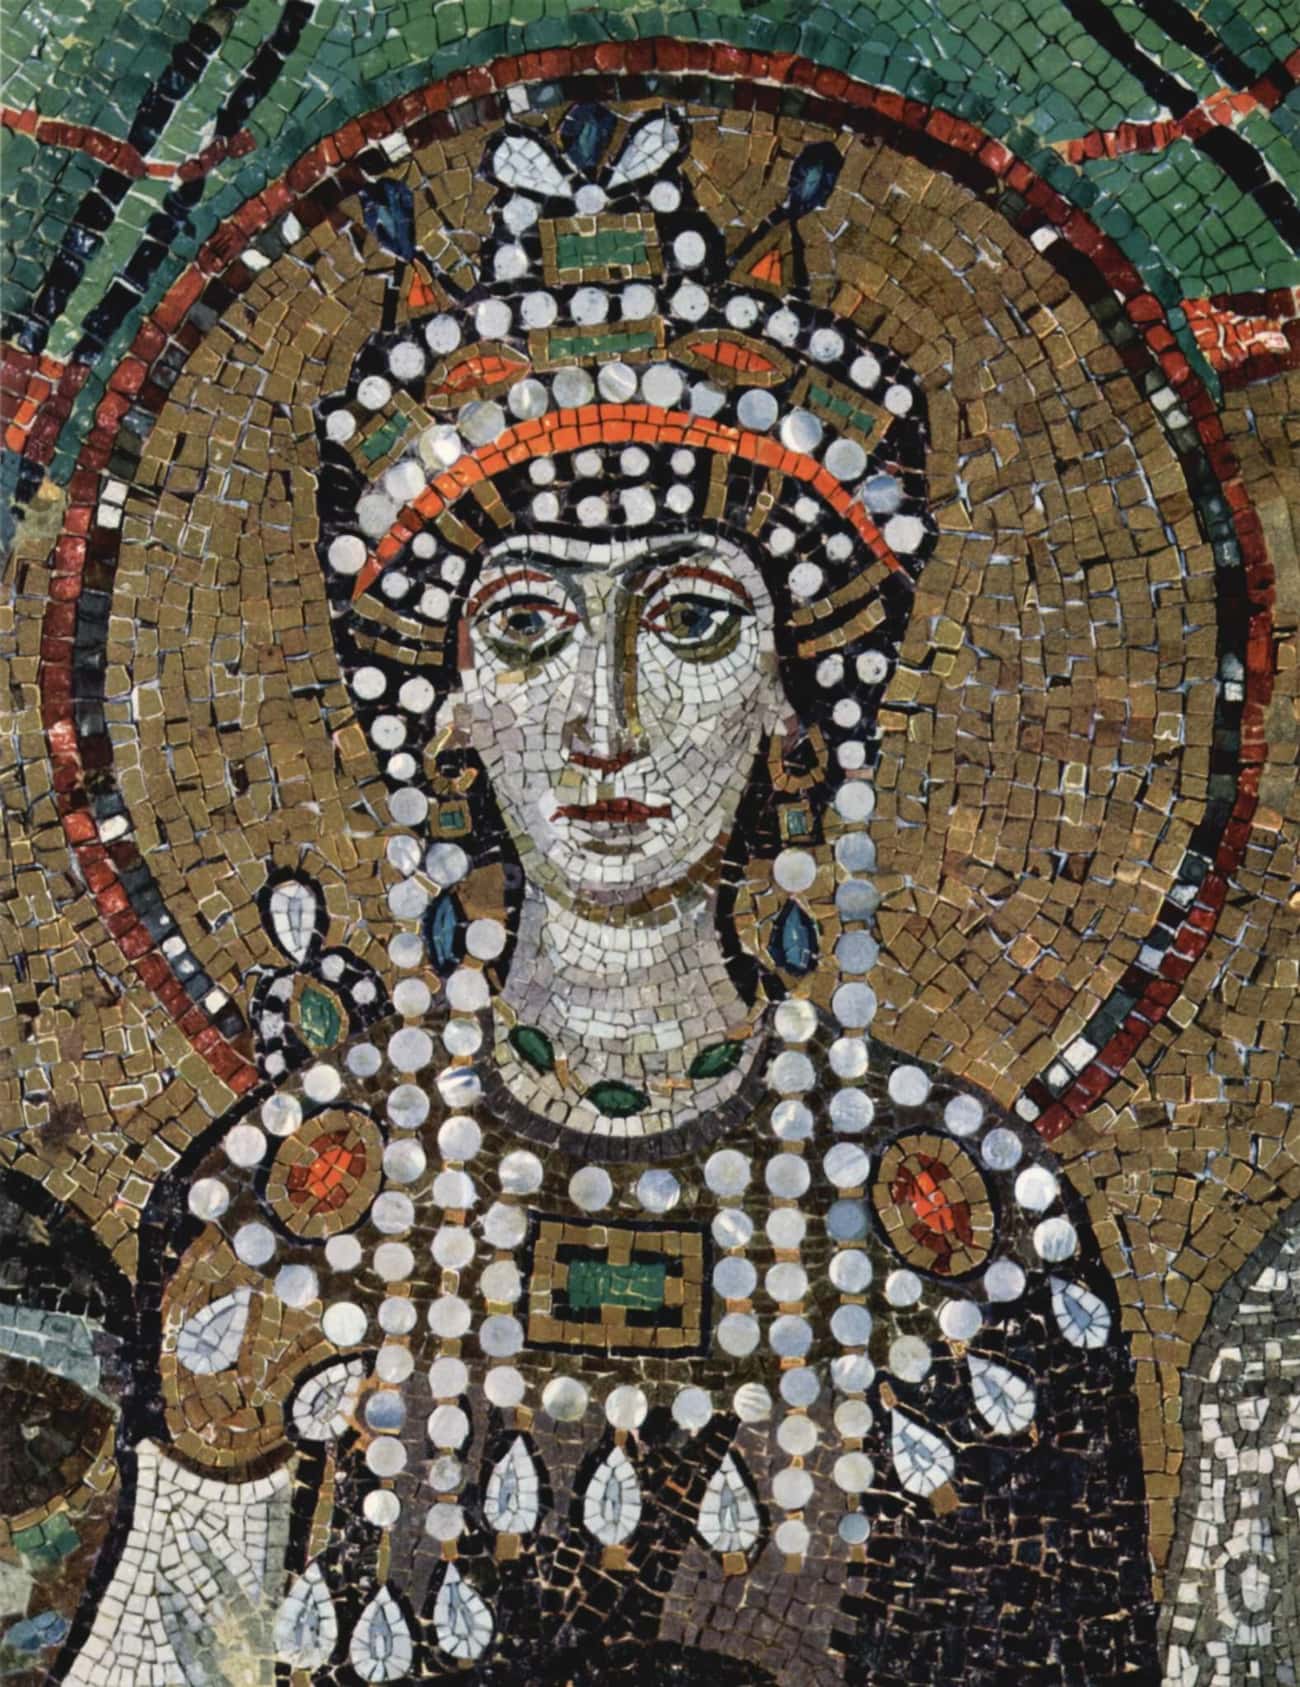 Theodora Started As An Actor Who Became An Empress